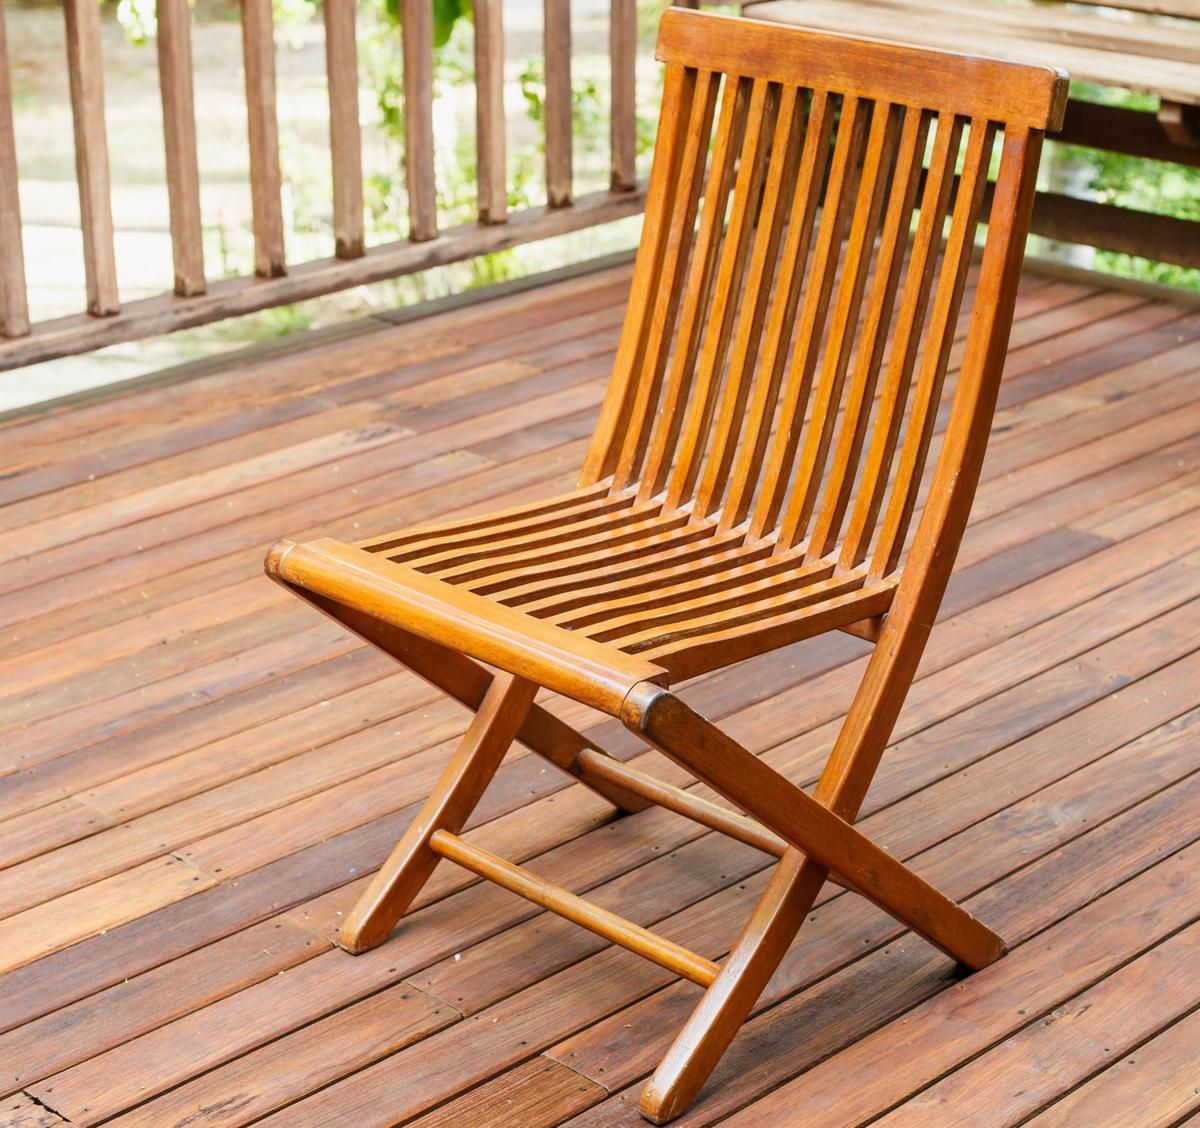 Types of Wood for Outdoor Furniture